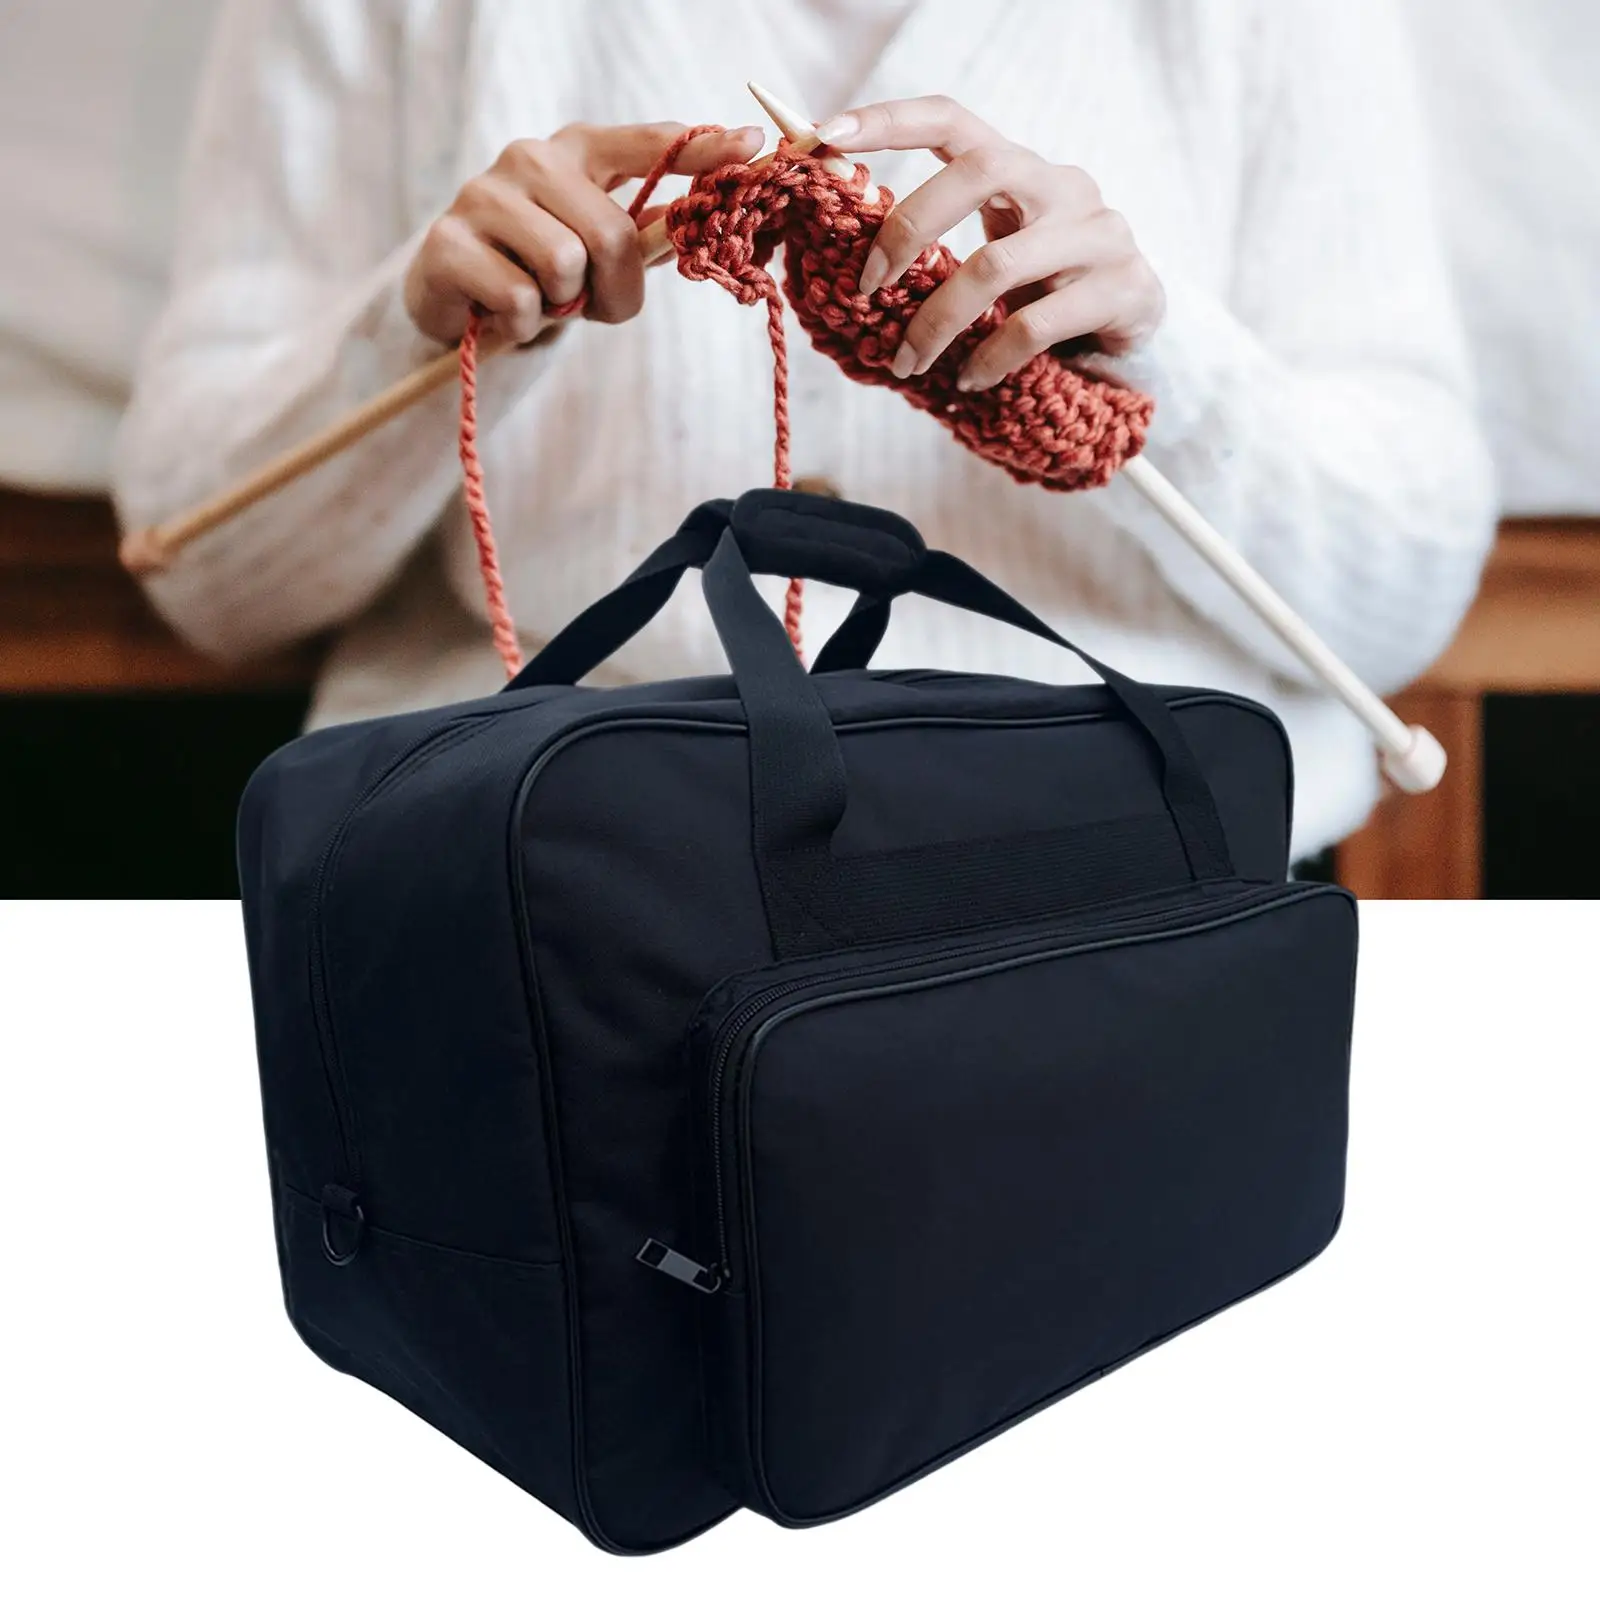 Black Sewing Machine Storage Bag Universal Shoulder Bag Tote Compatible with Most Sewing Machines and Extra Sewing Accessories